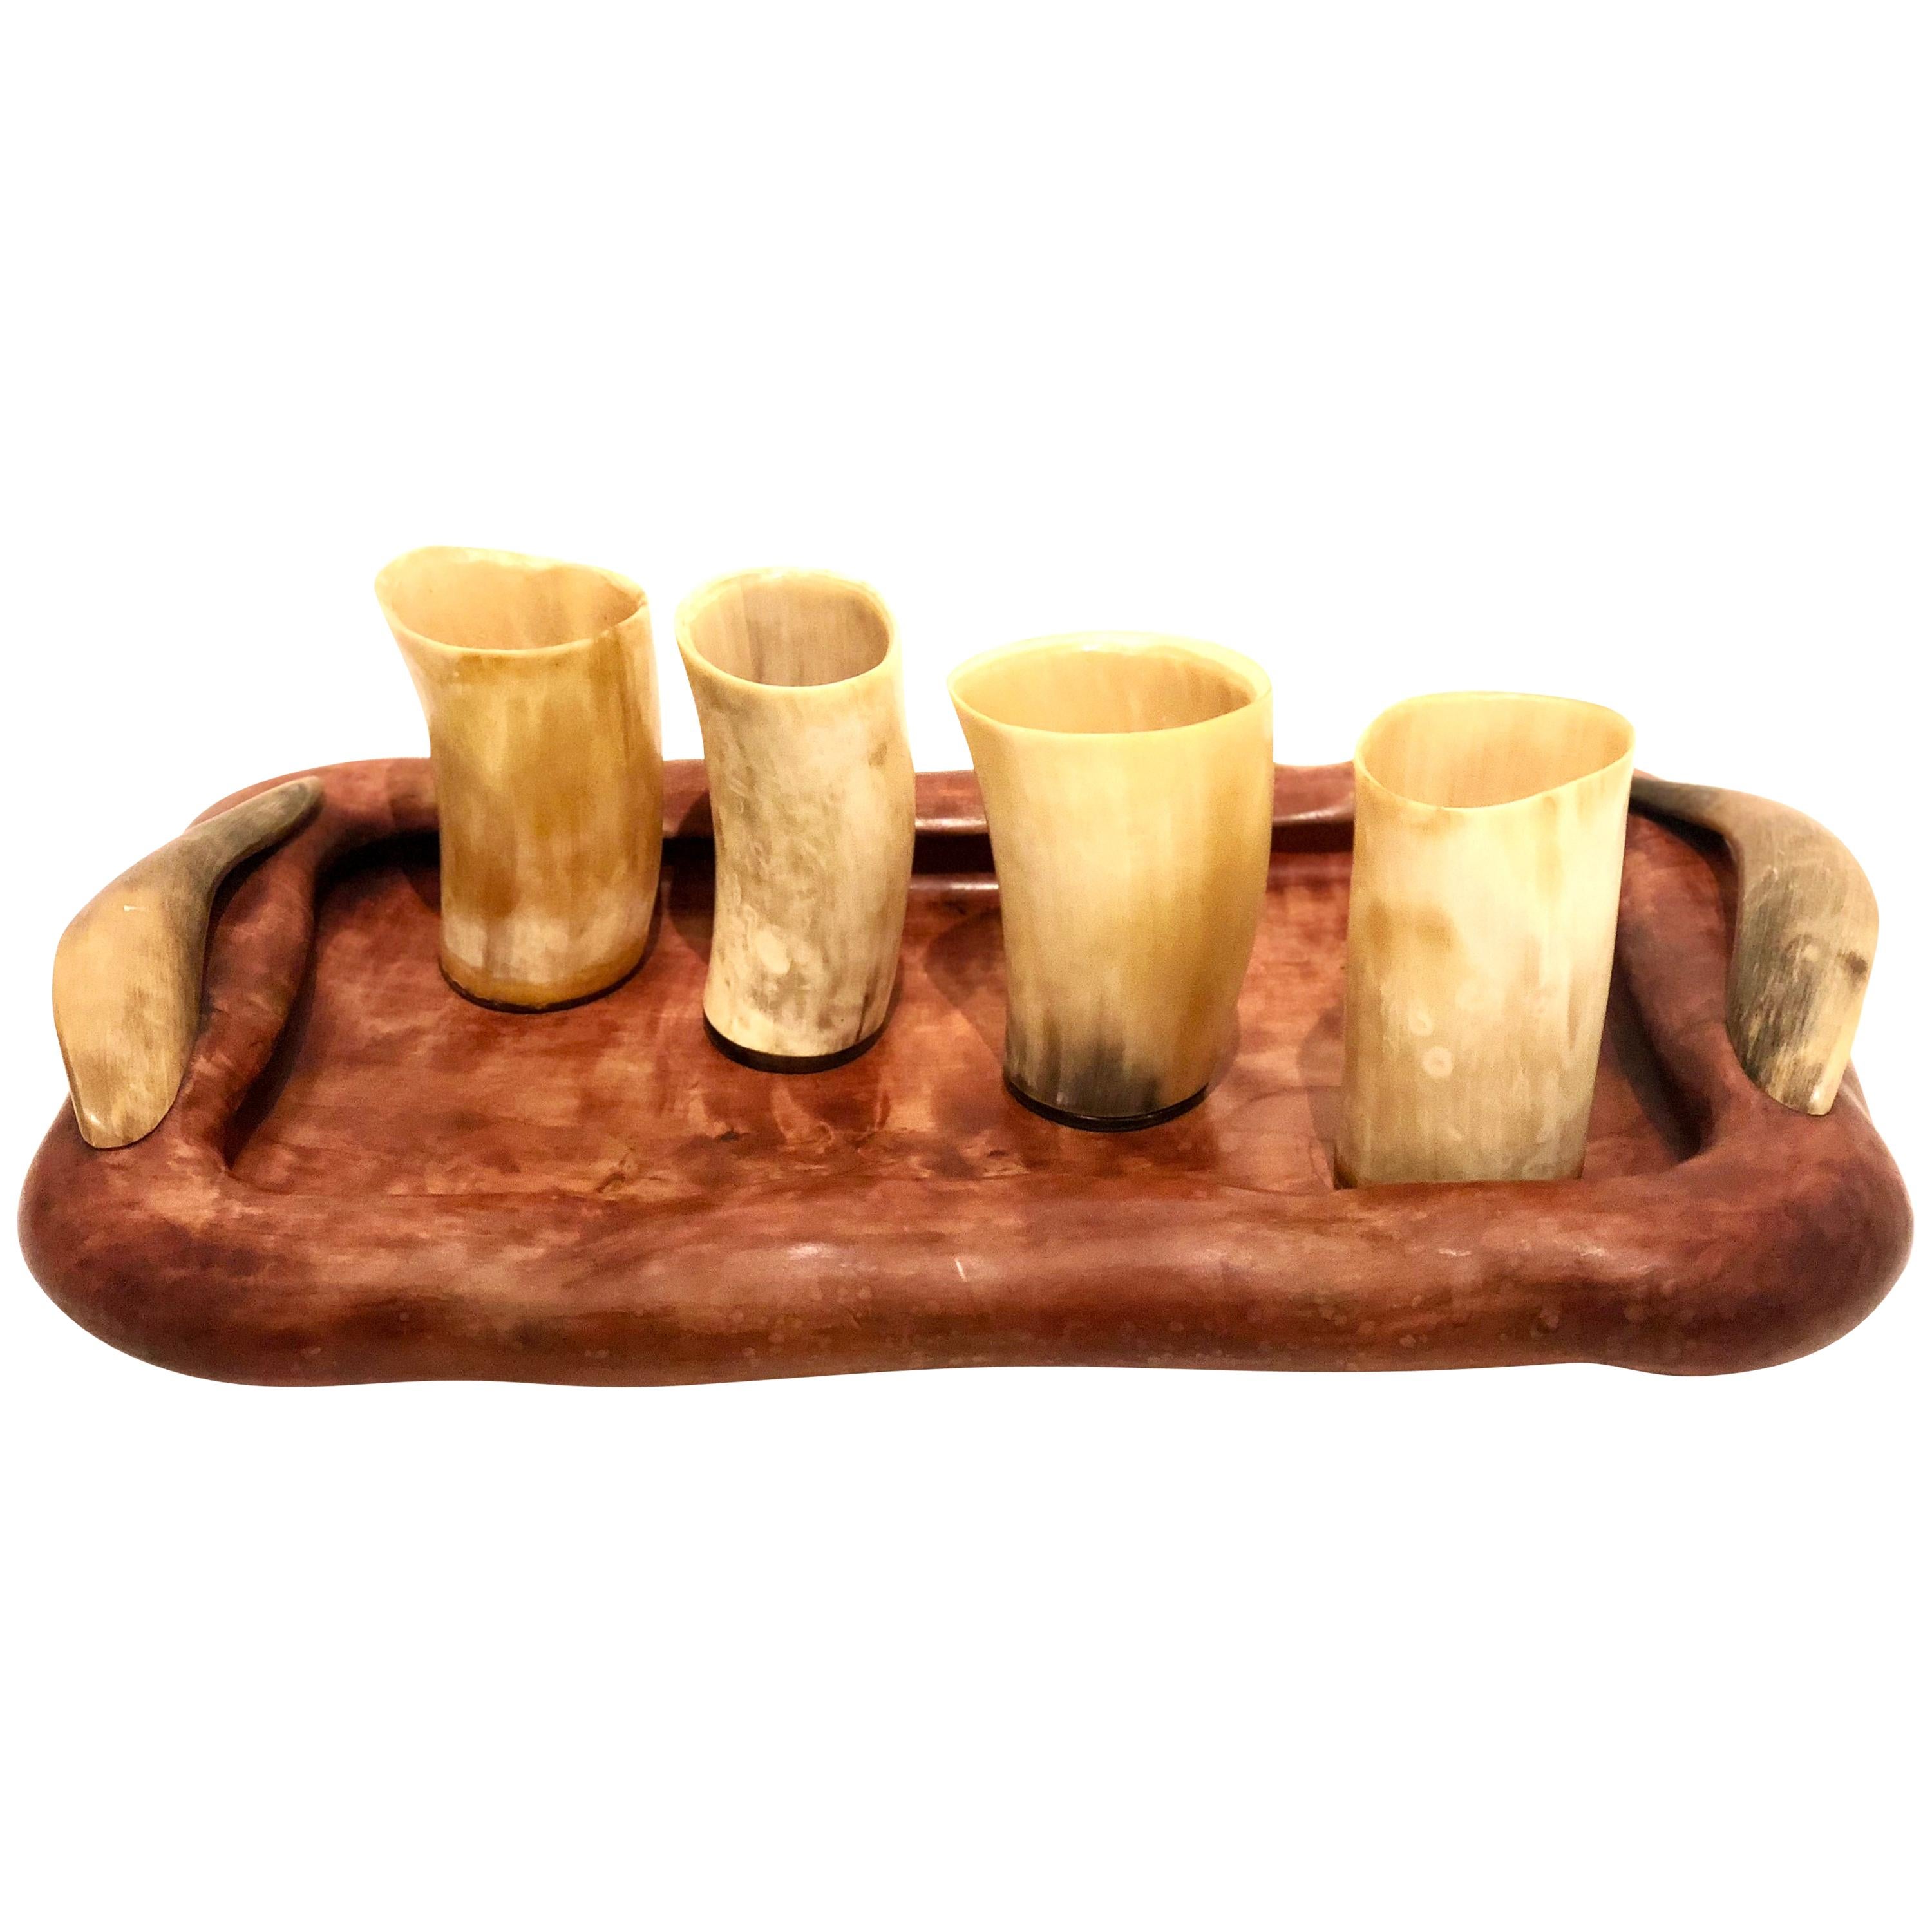 Rare Art Deco Serving Tray in Carved Wood with Horns by French Artist Dan Karner For Sale